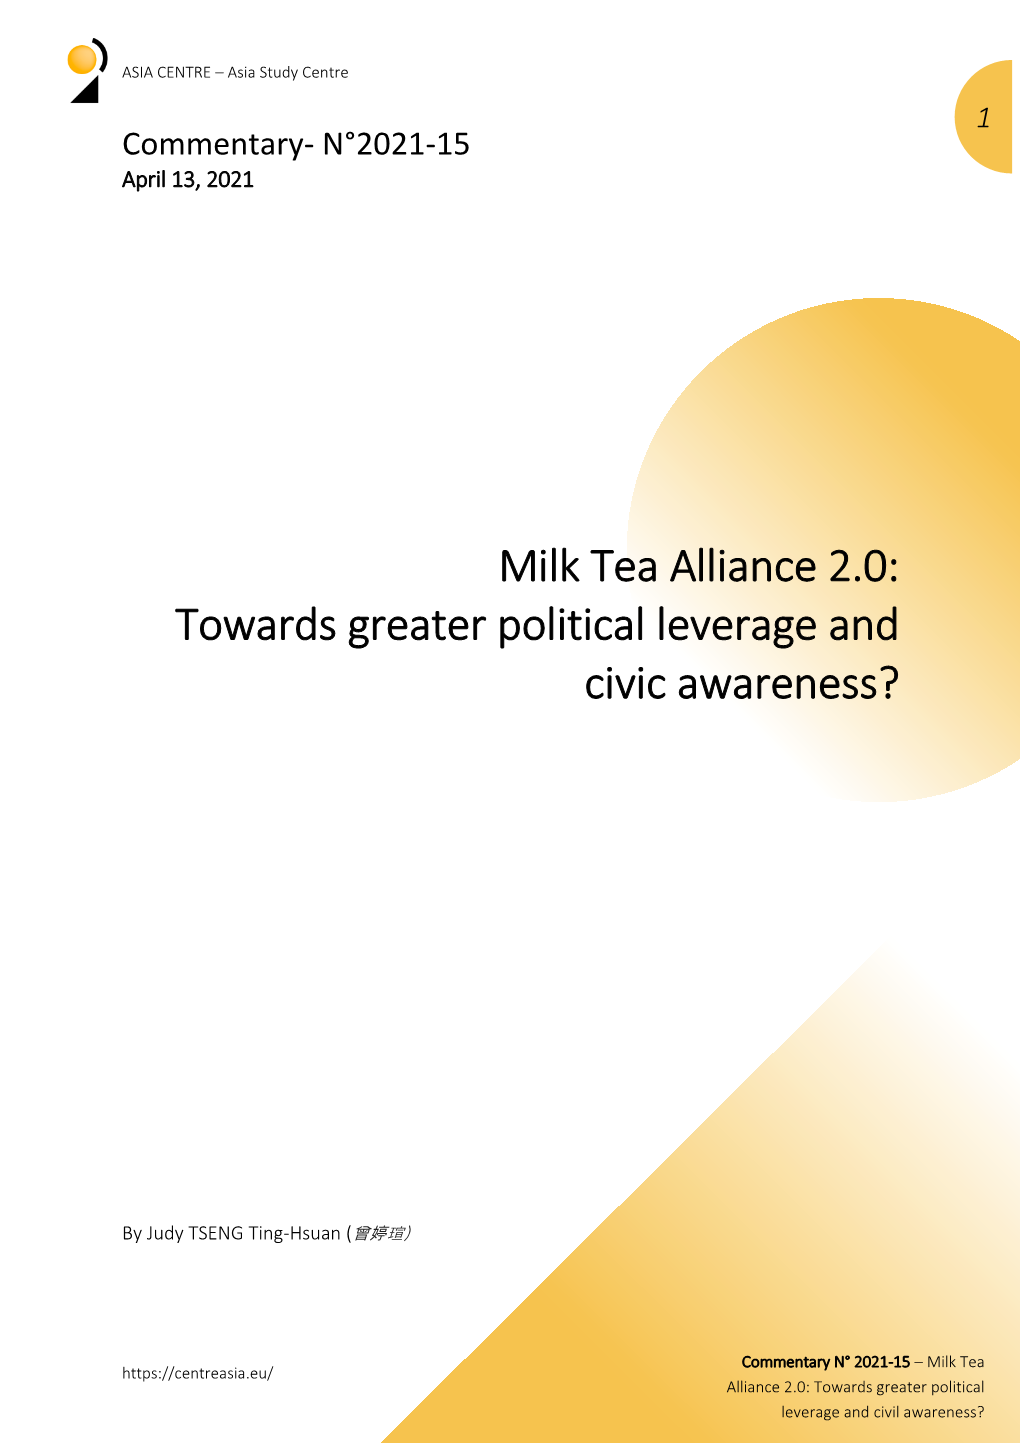 Milk Tea Alliance 2.0: Towards Greater Political Leverage and Civic Awareness?